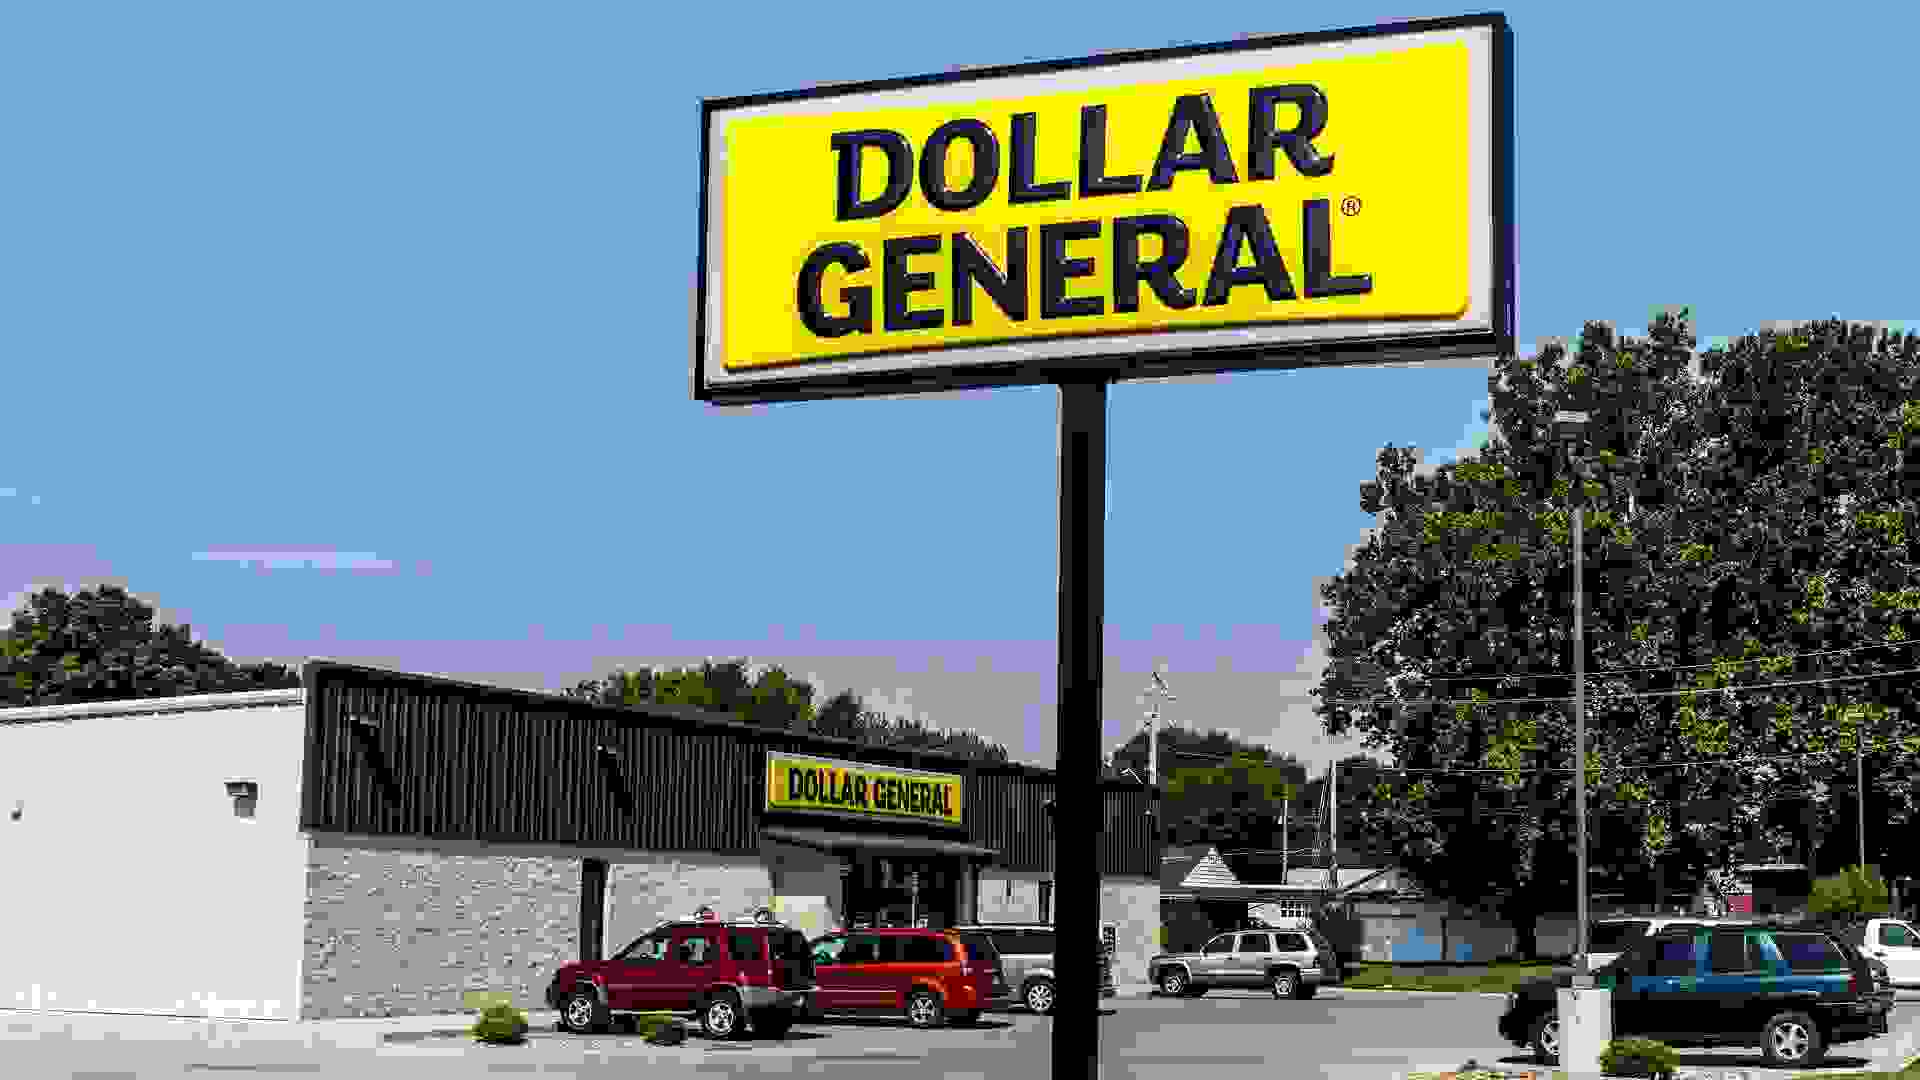 Dollar General Retail Location. Dollar General is a Small-Box Discount Retailer III stock photo